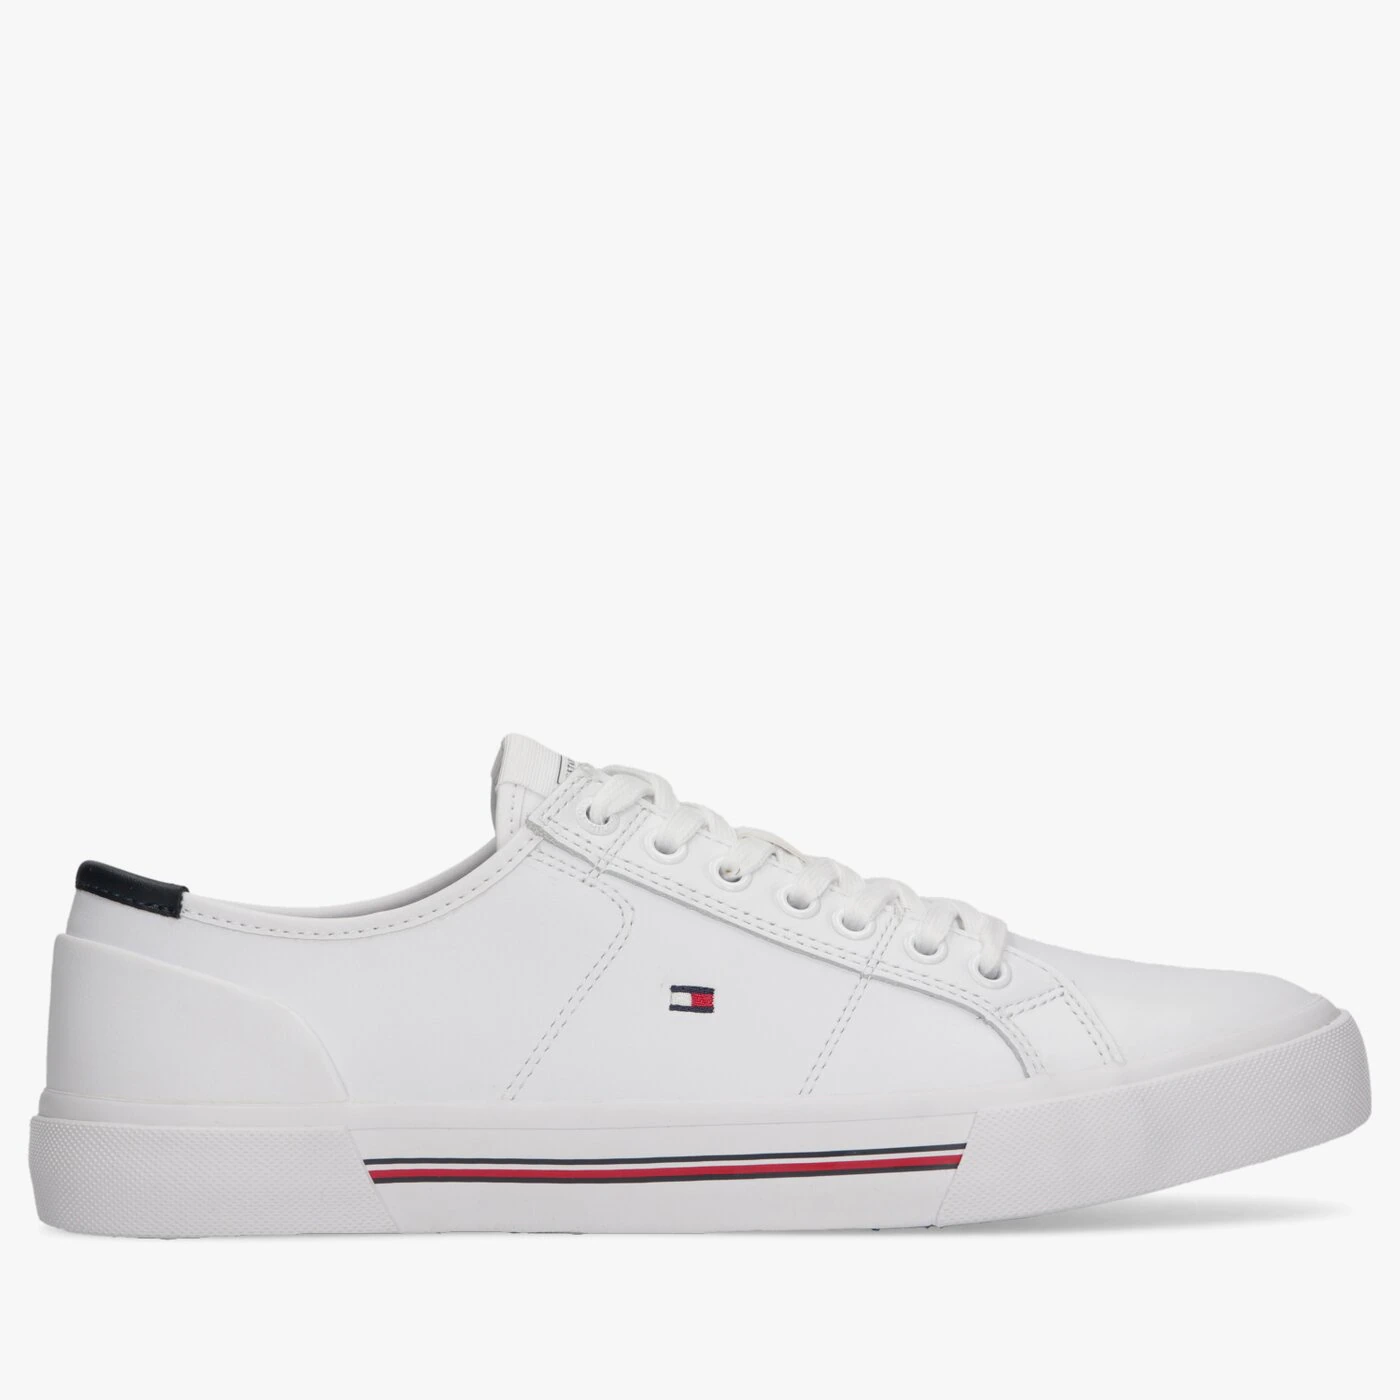 TOMMY HILFIGER CORE CORPORATE LEATHER VULC